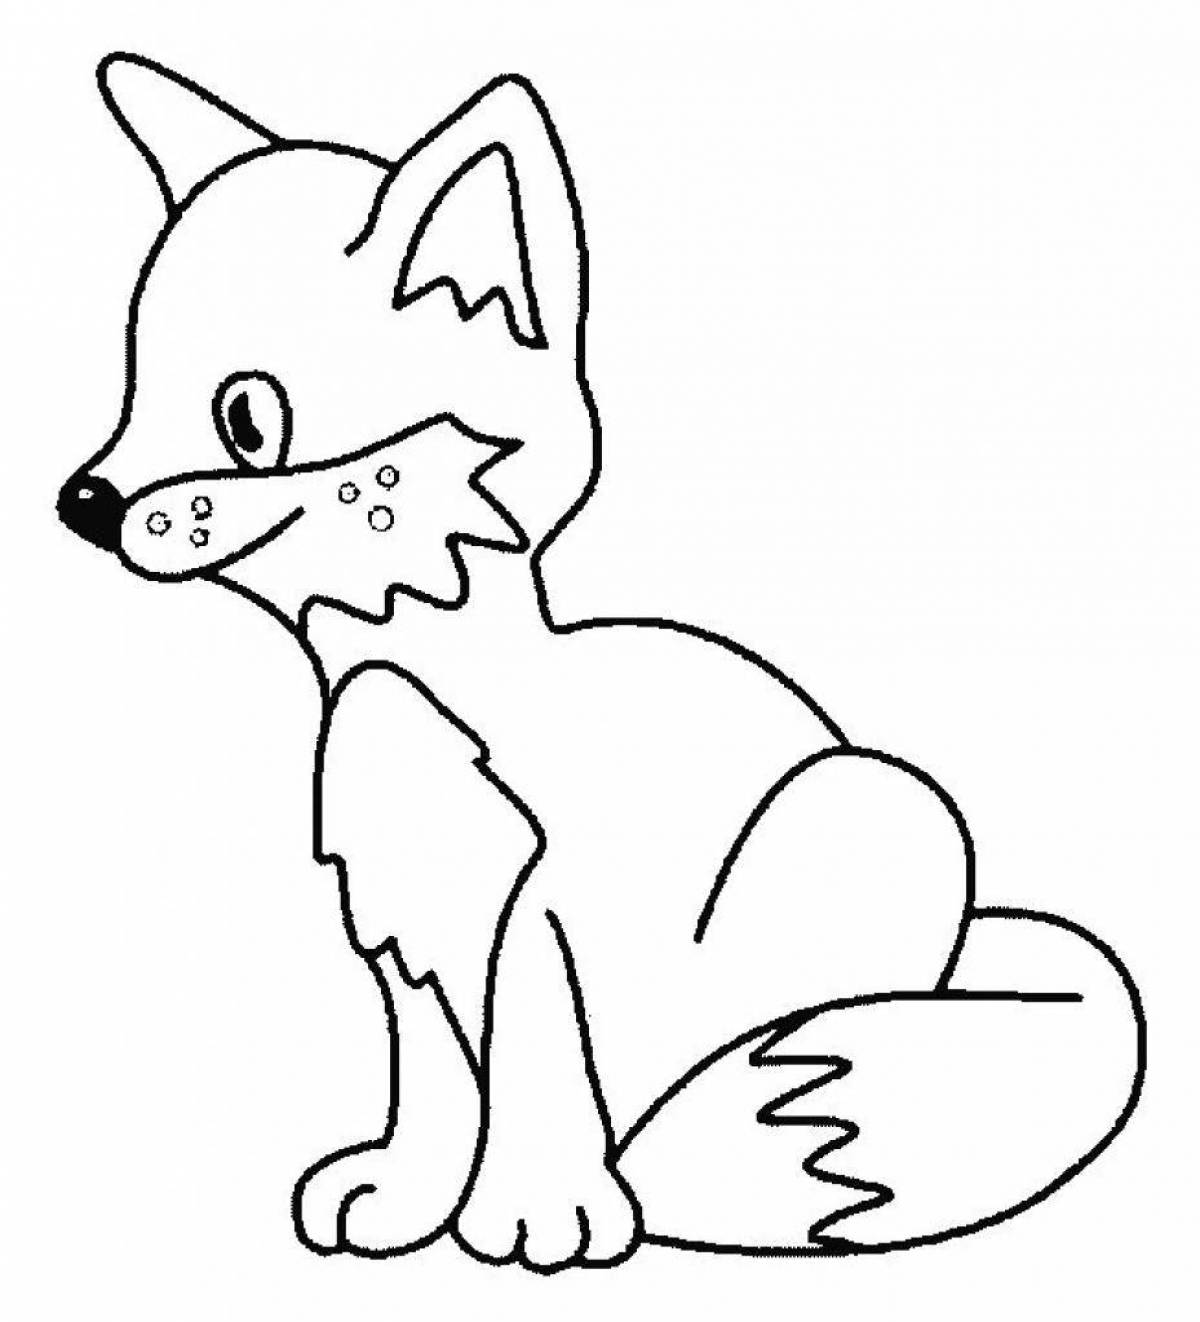 Fancy fox coloring book for kids 6-7 years old